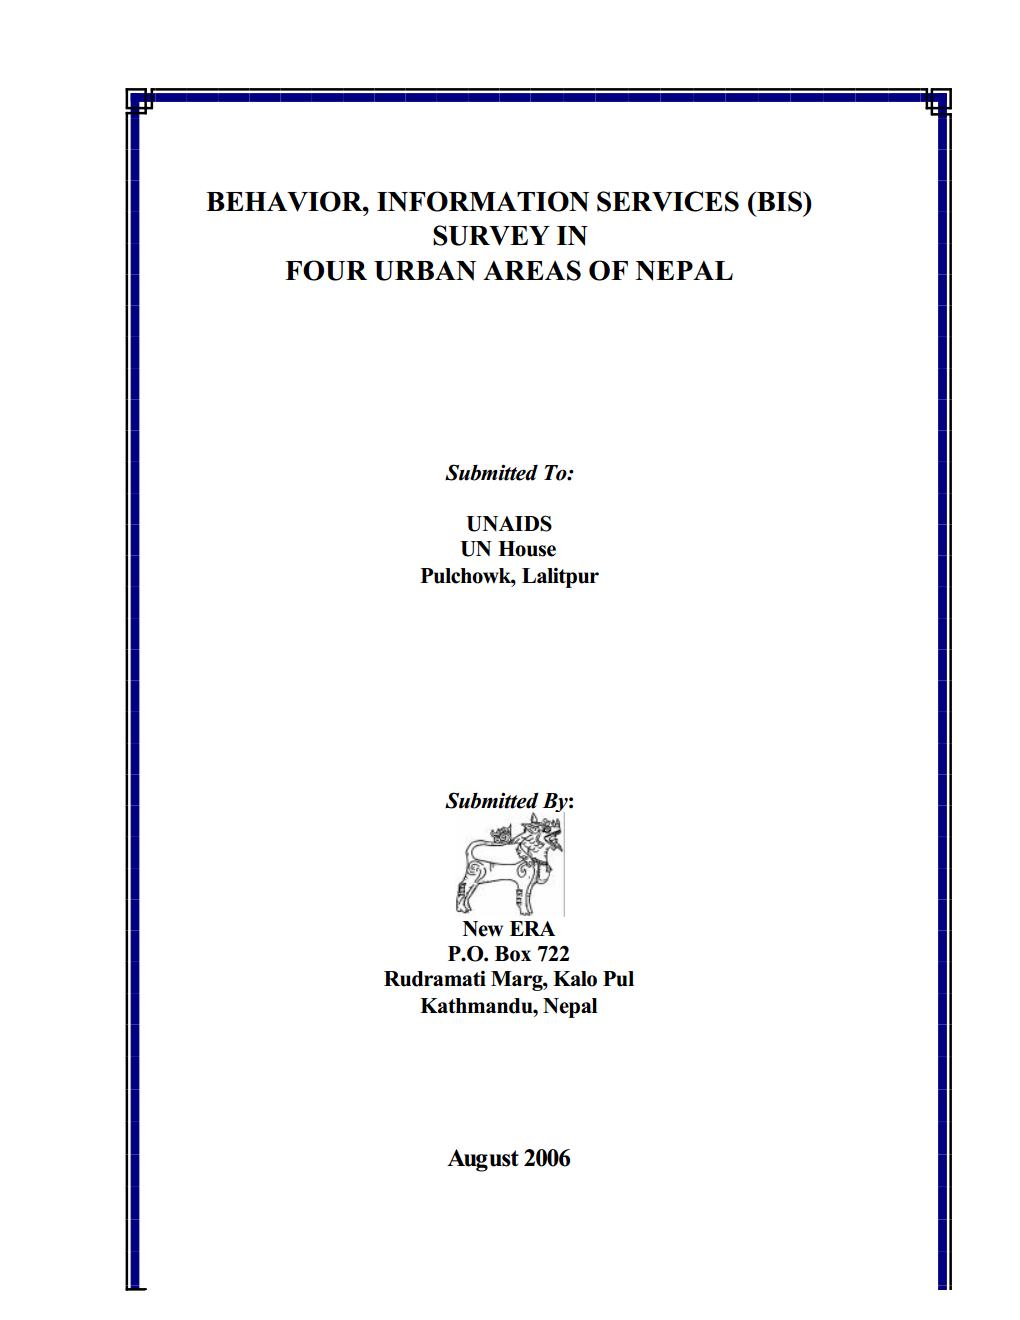 Behaviour, Information and Services Survey (BISS) of HIV/AIDS among Young and Adults